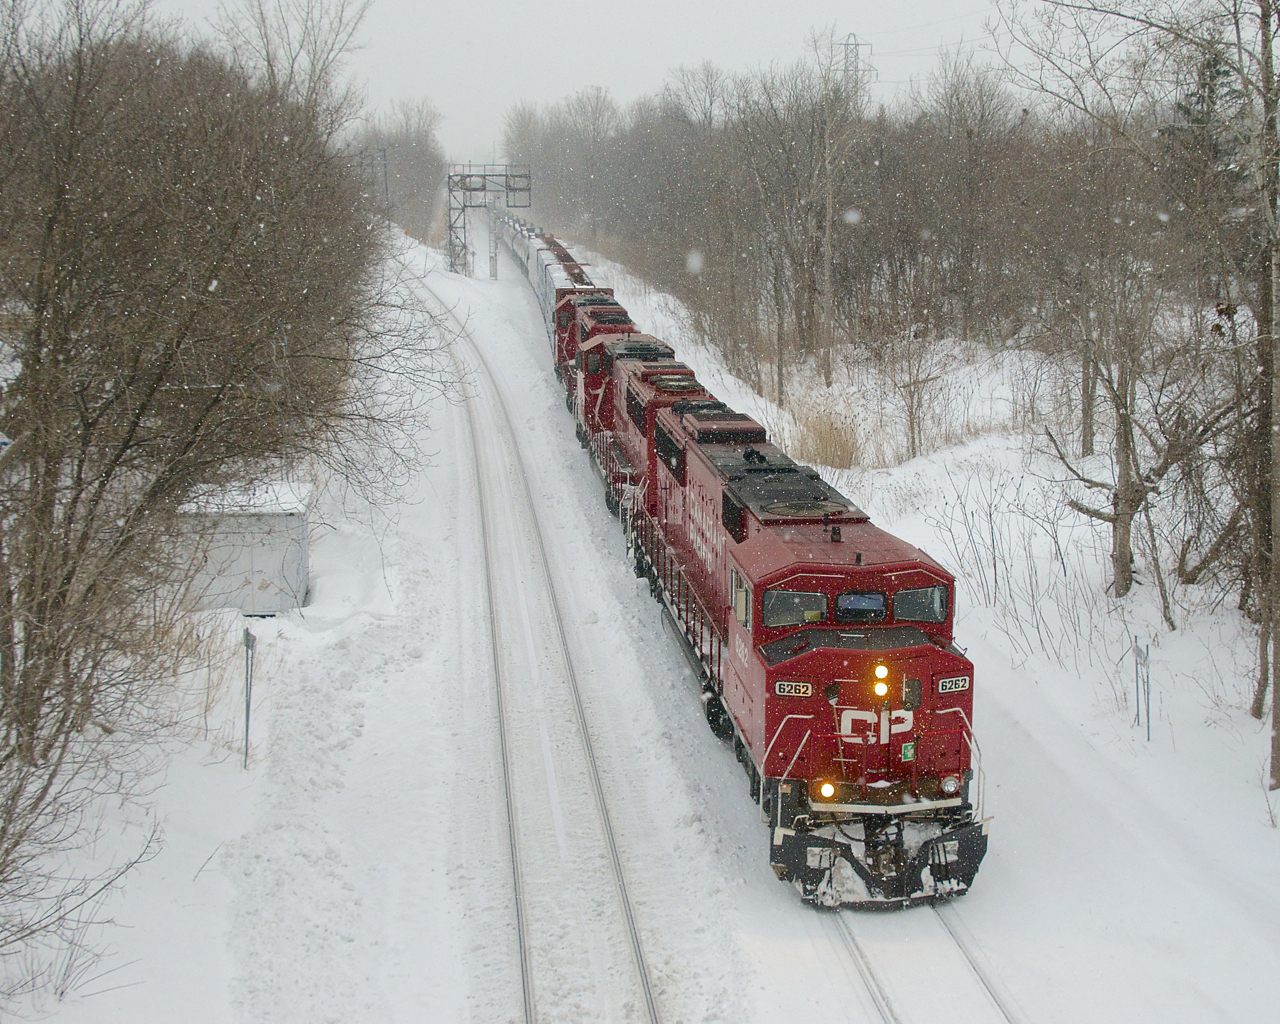 Snow is falling as CP 251 passes North Jct with an ex-SOO trio for power (CP 6262, CP 6252 & CP 6232).